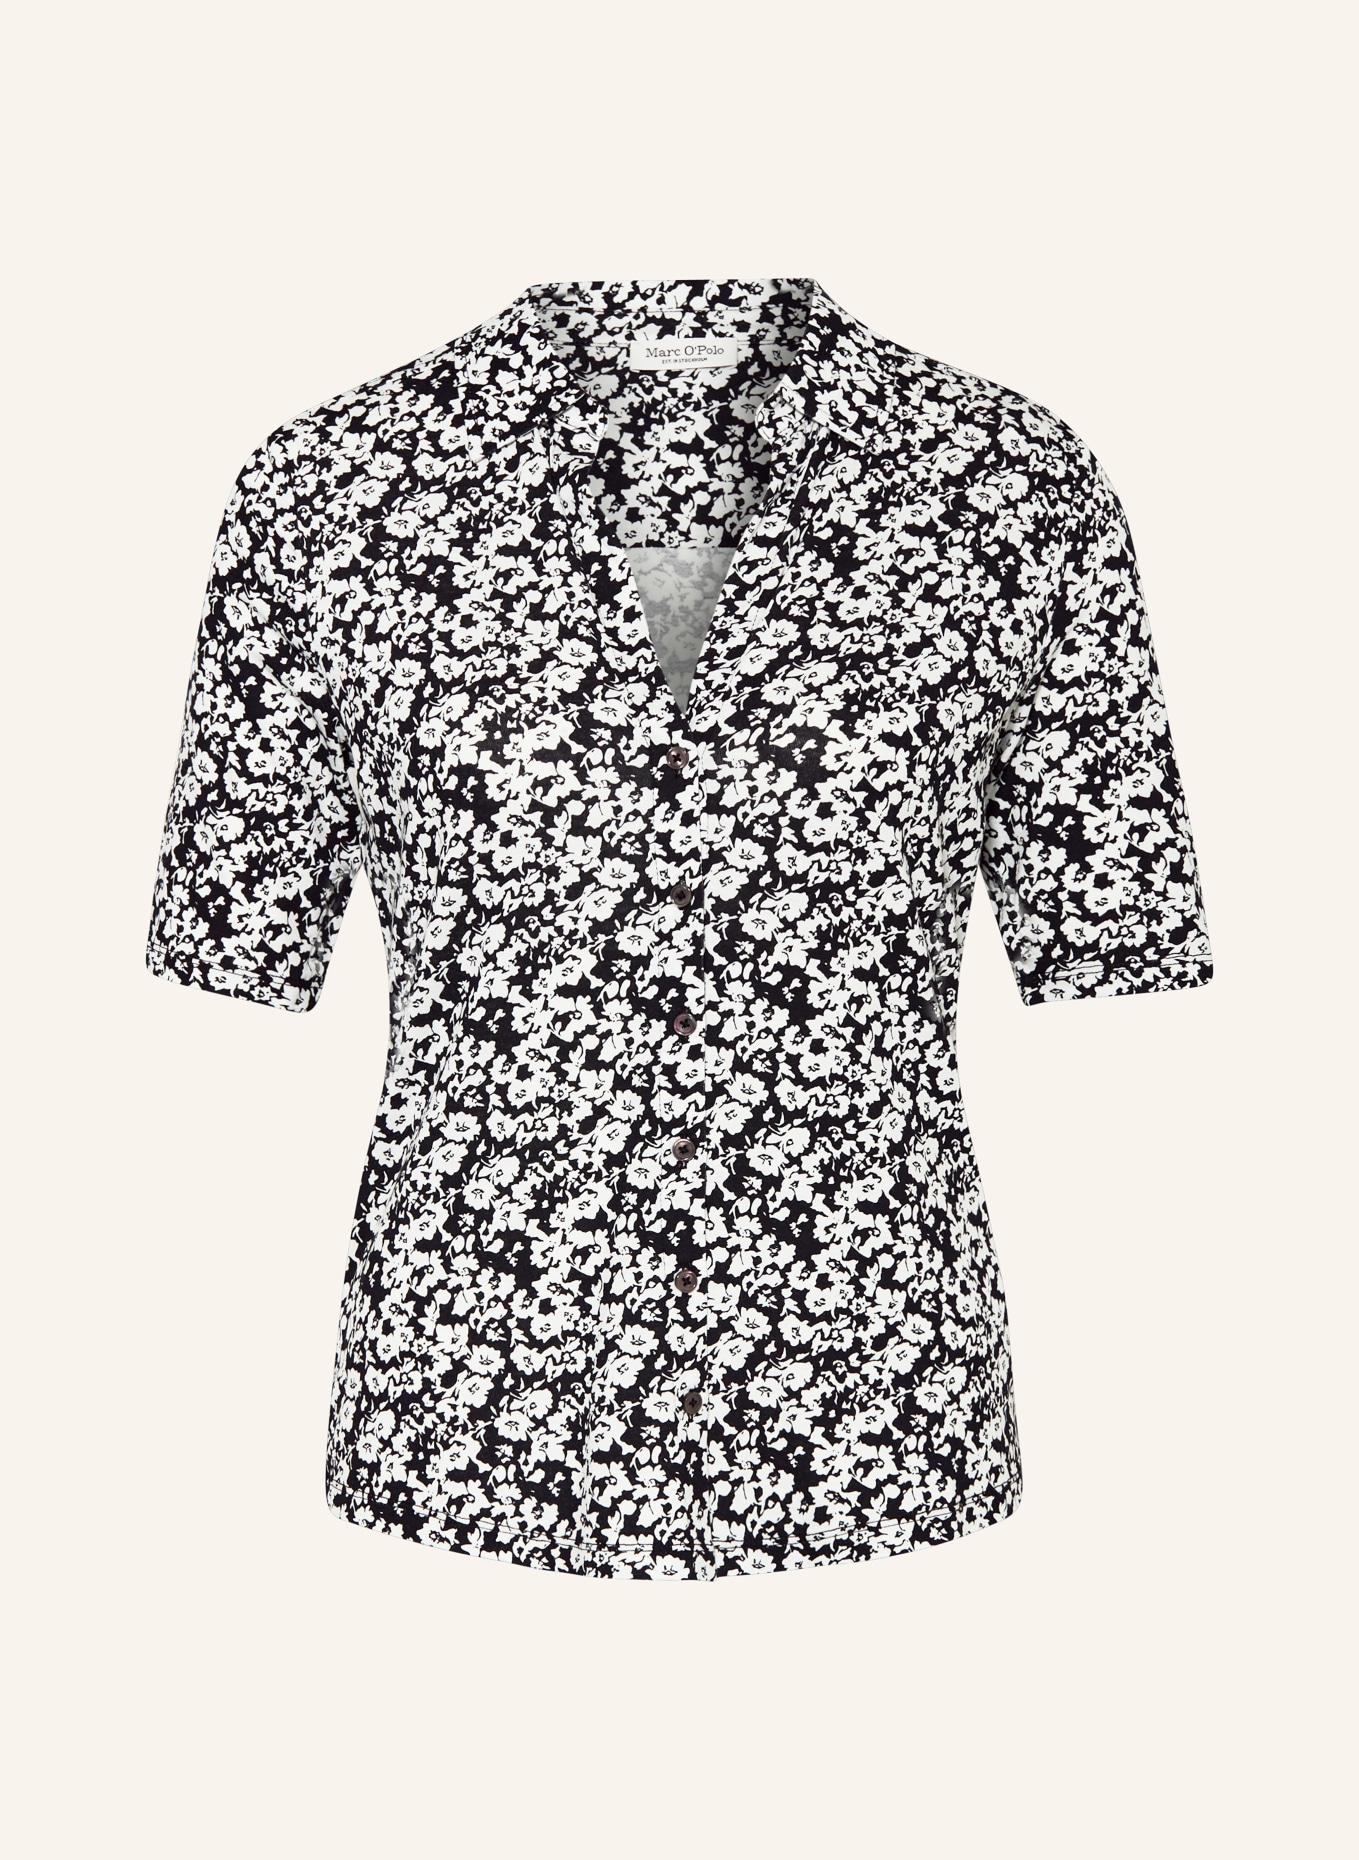 Marc O'Polo Shirt blouse made of jersey, Color: BLACK/ WHITE (Image 1)